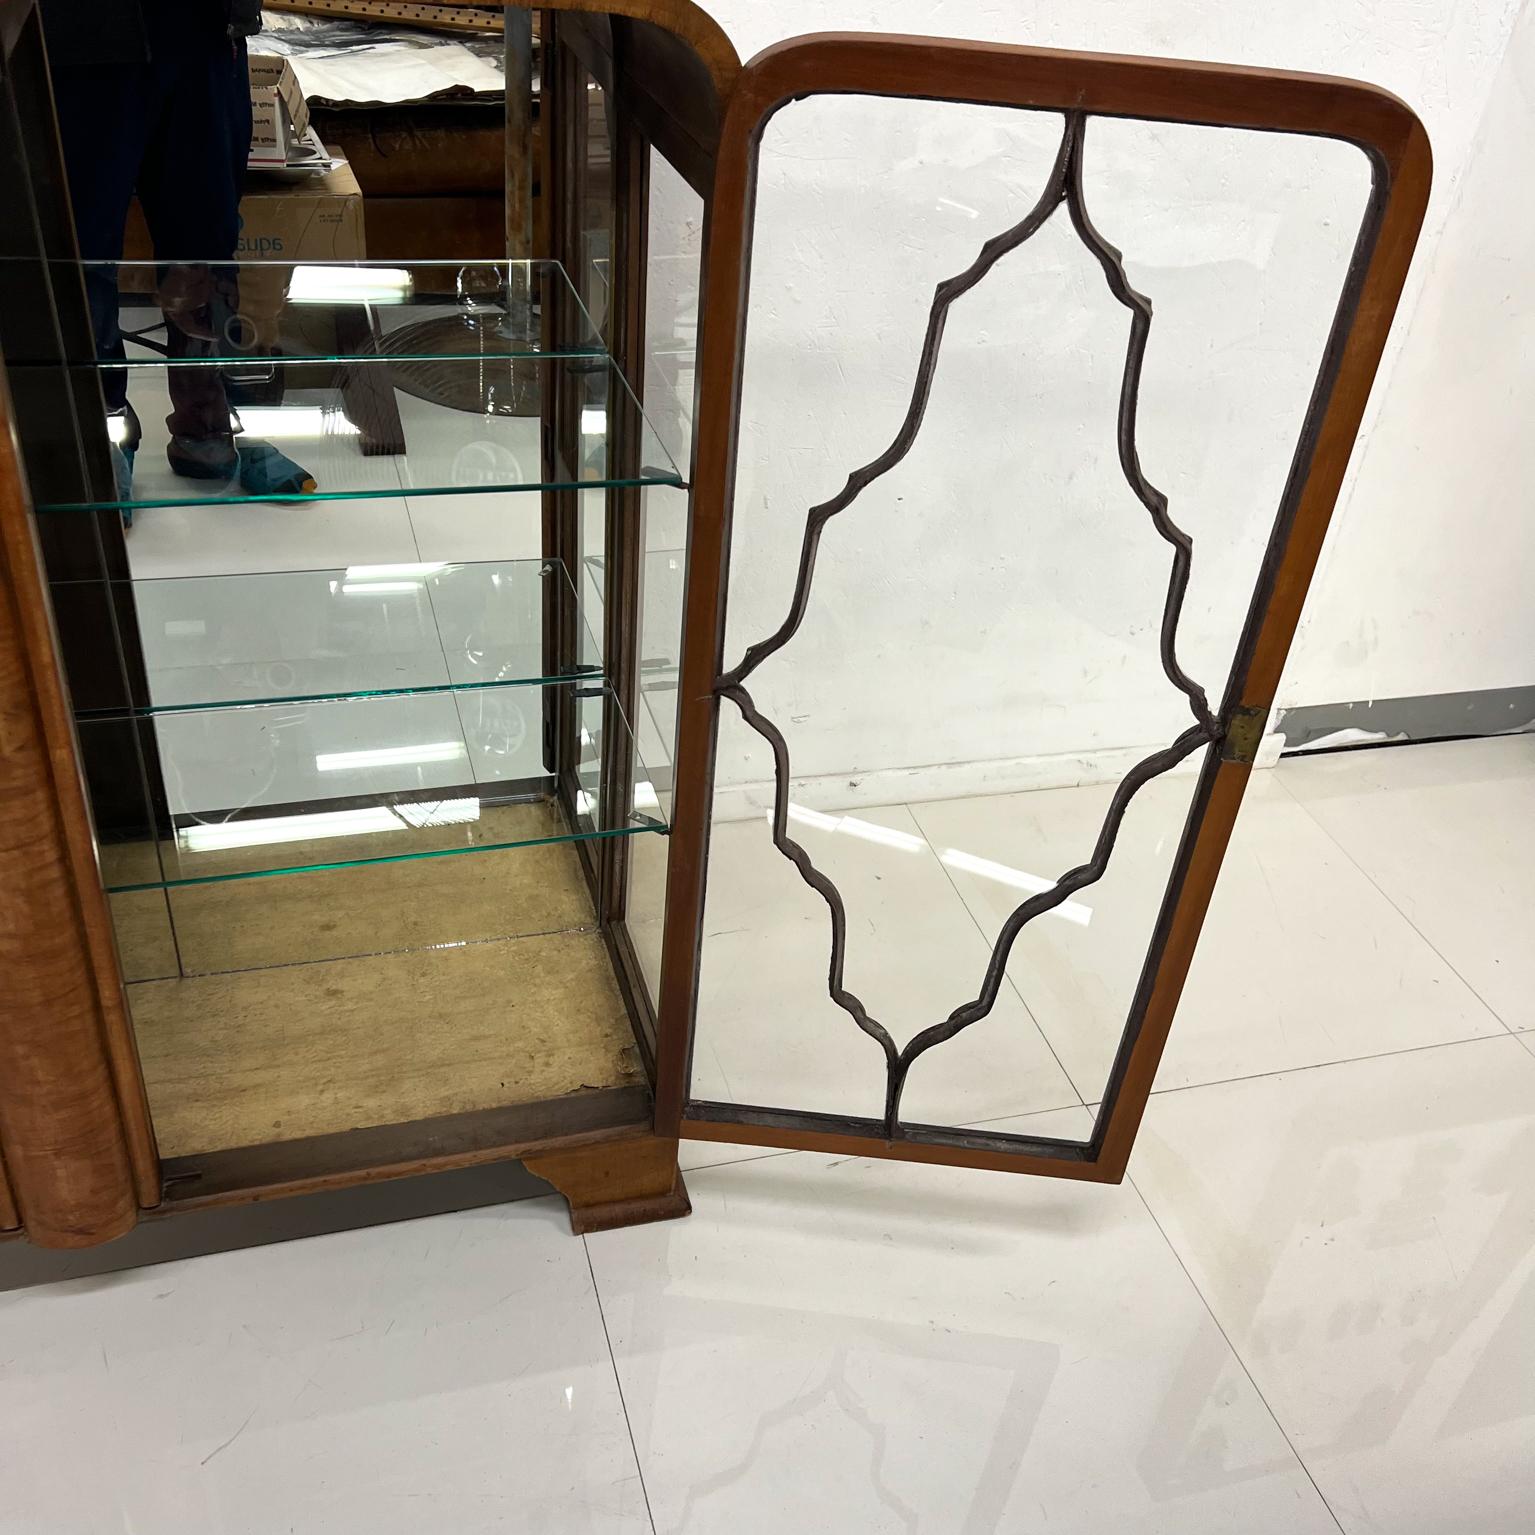 1930s Art Deco Vitrine Display Cabinet Sculptural Exotic Wood Glass Shelving For Sale 15